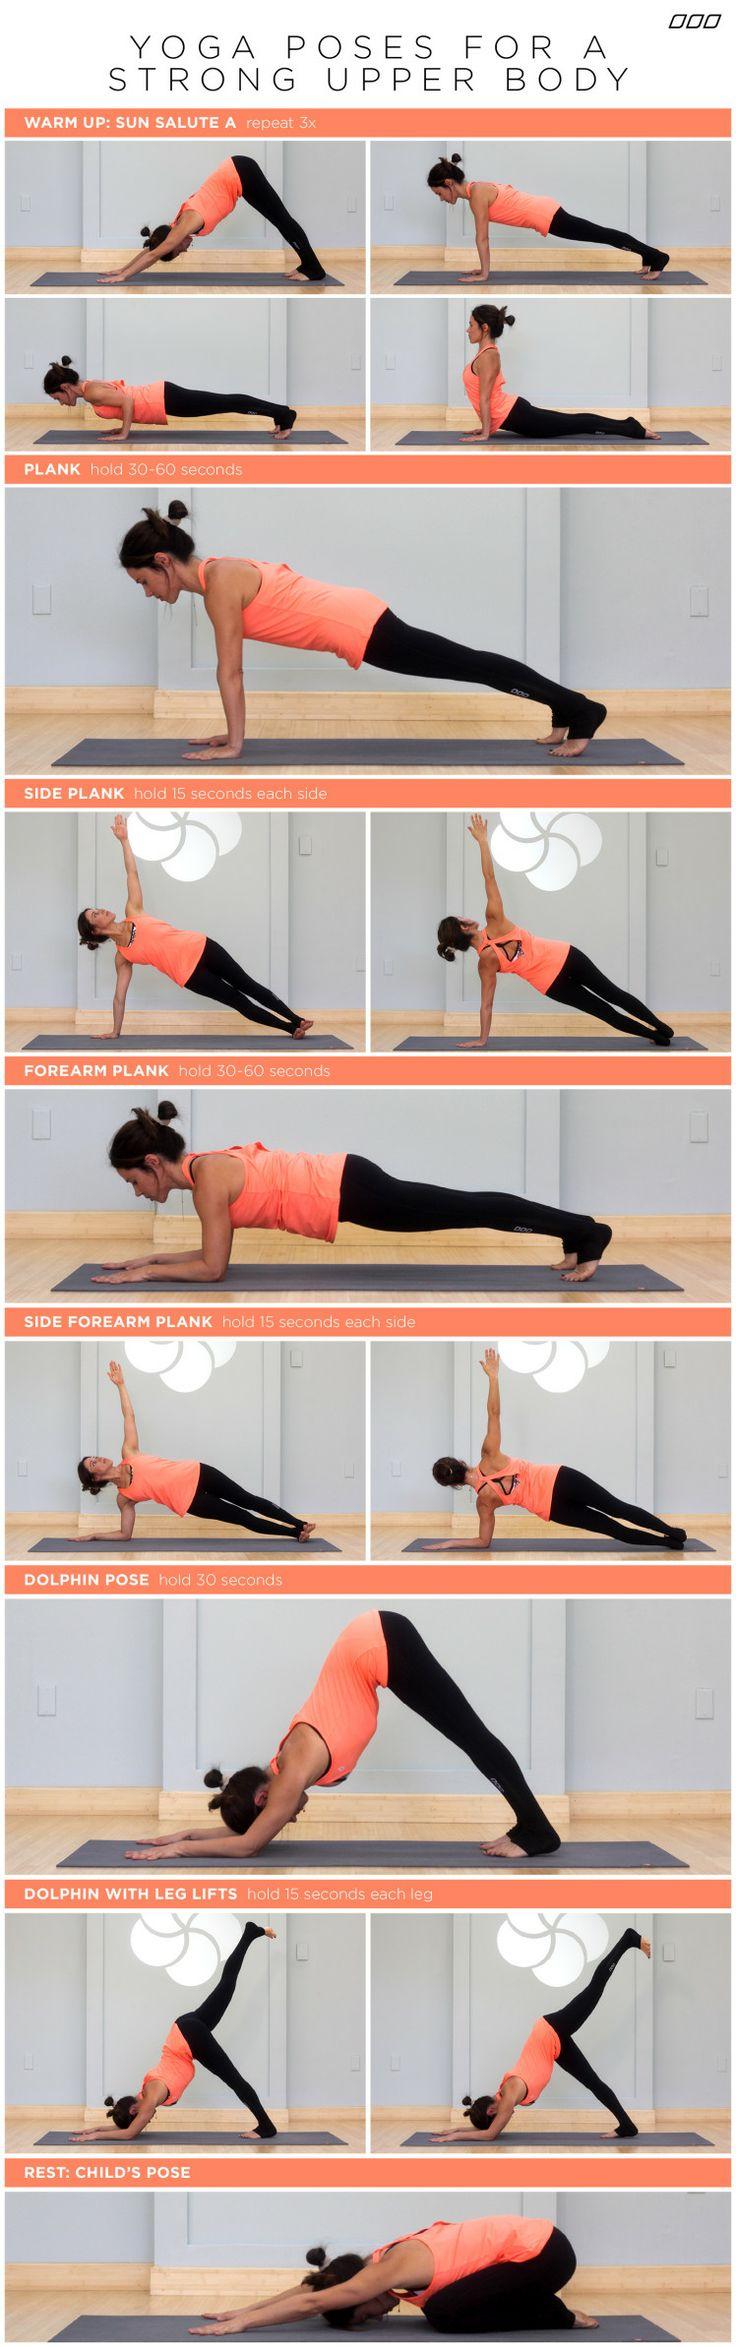 Wedding - Yoga Poses For A Strong Upper Body